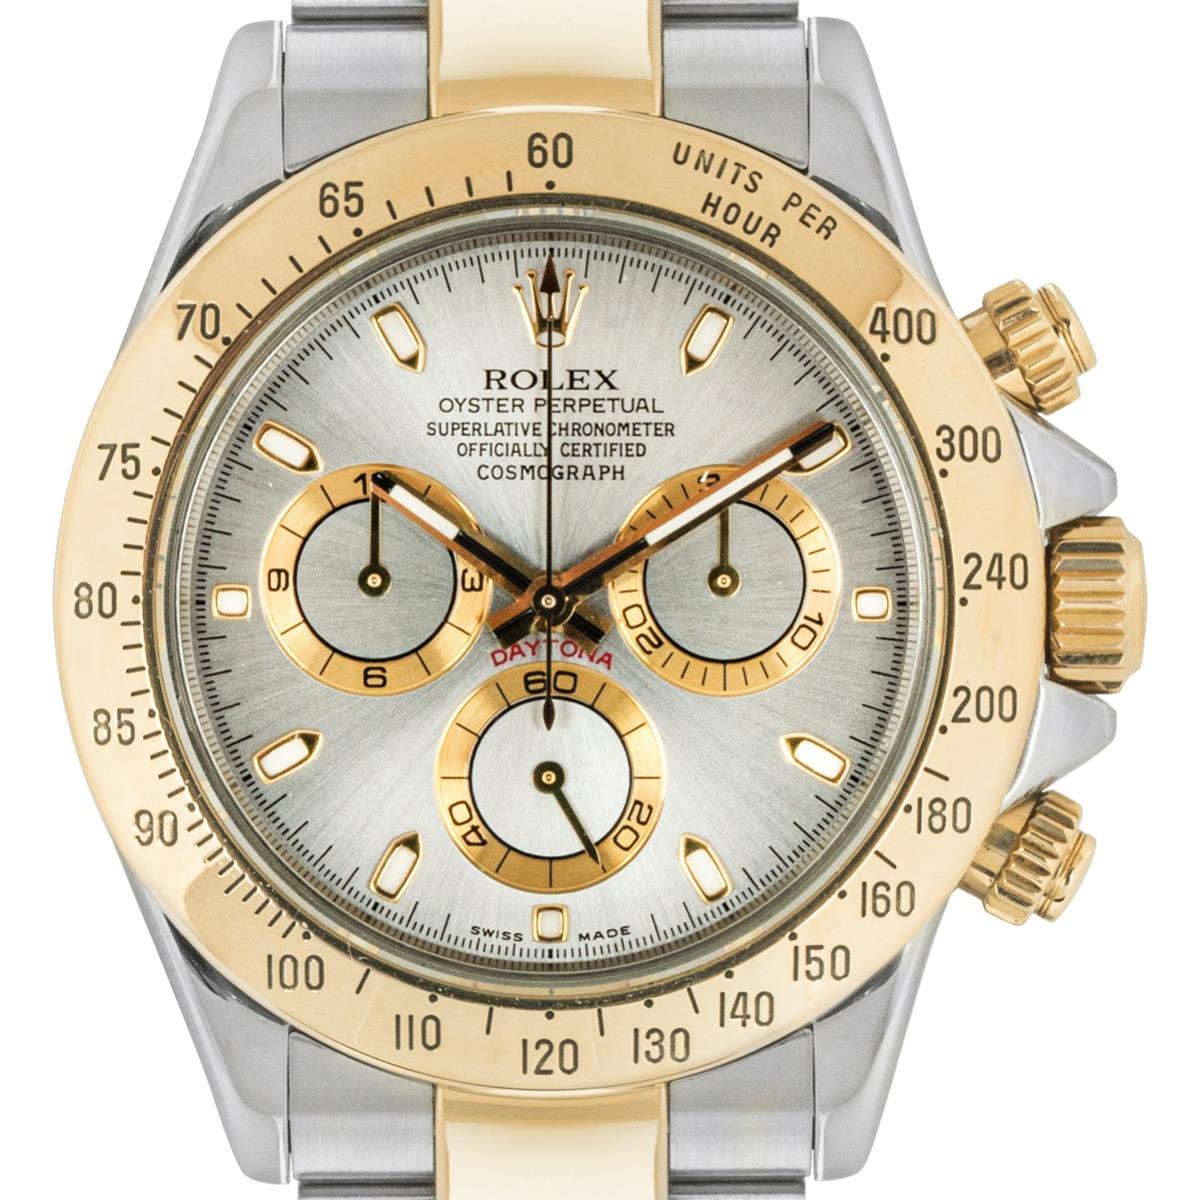 A Daytona in Oystersteel and yellow gold by Rolex. Featuring a distinctive grey dial with an engraved tachymetric scale, three chronograph counters and pushers, the Daytona was designed to be the ultimate timing tool for endurance racing